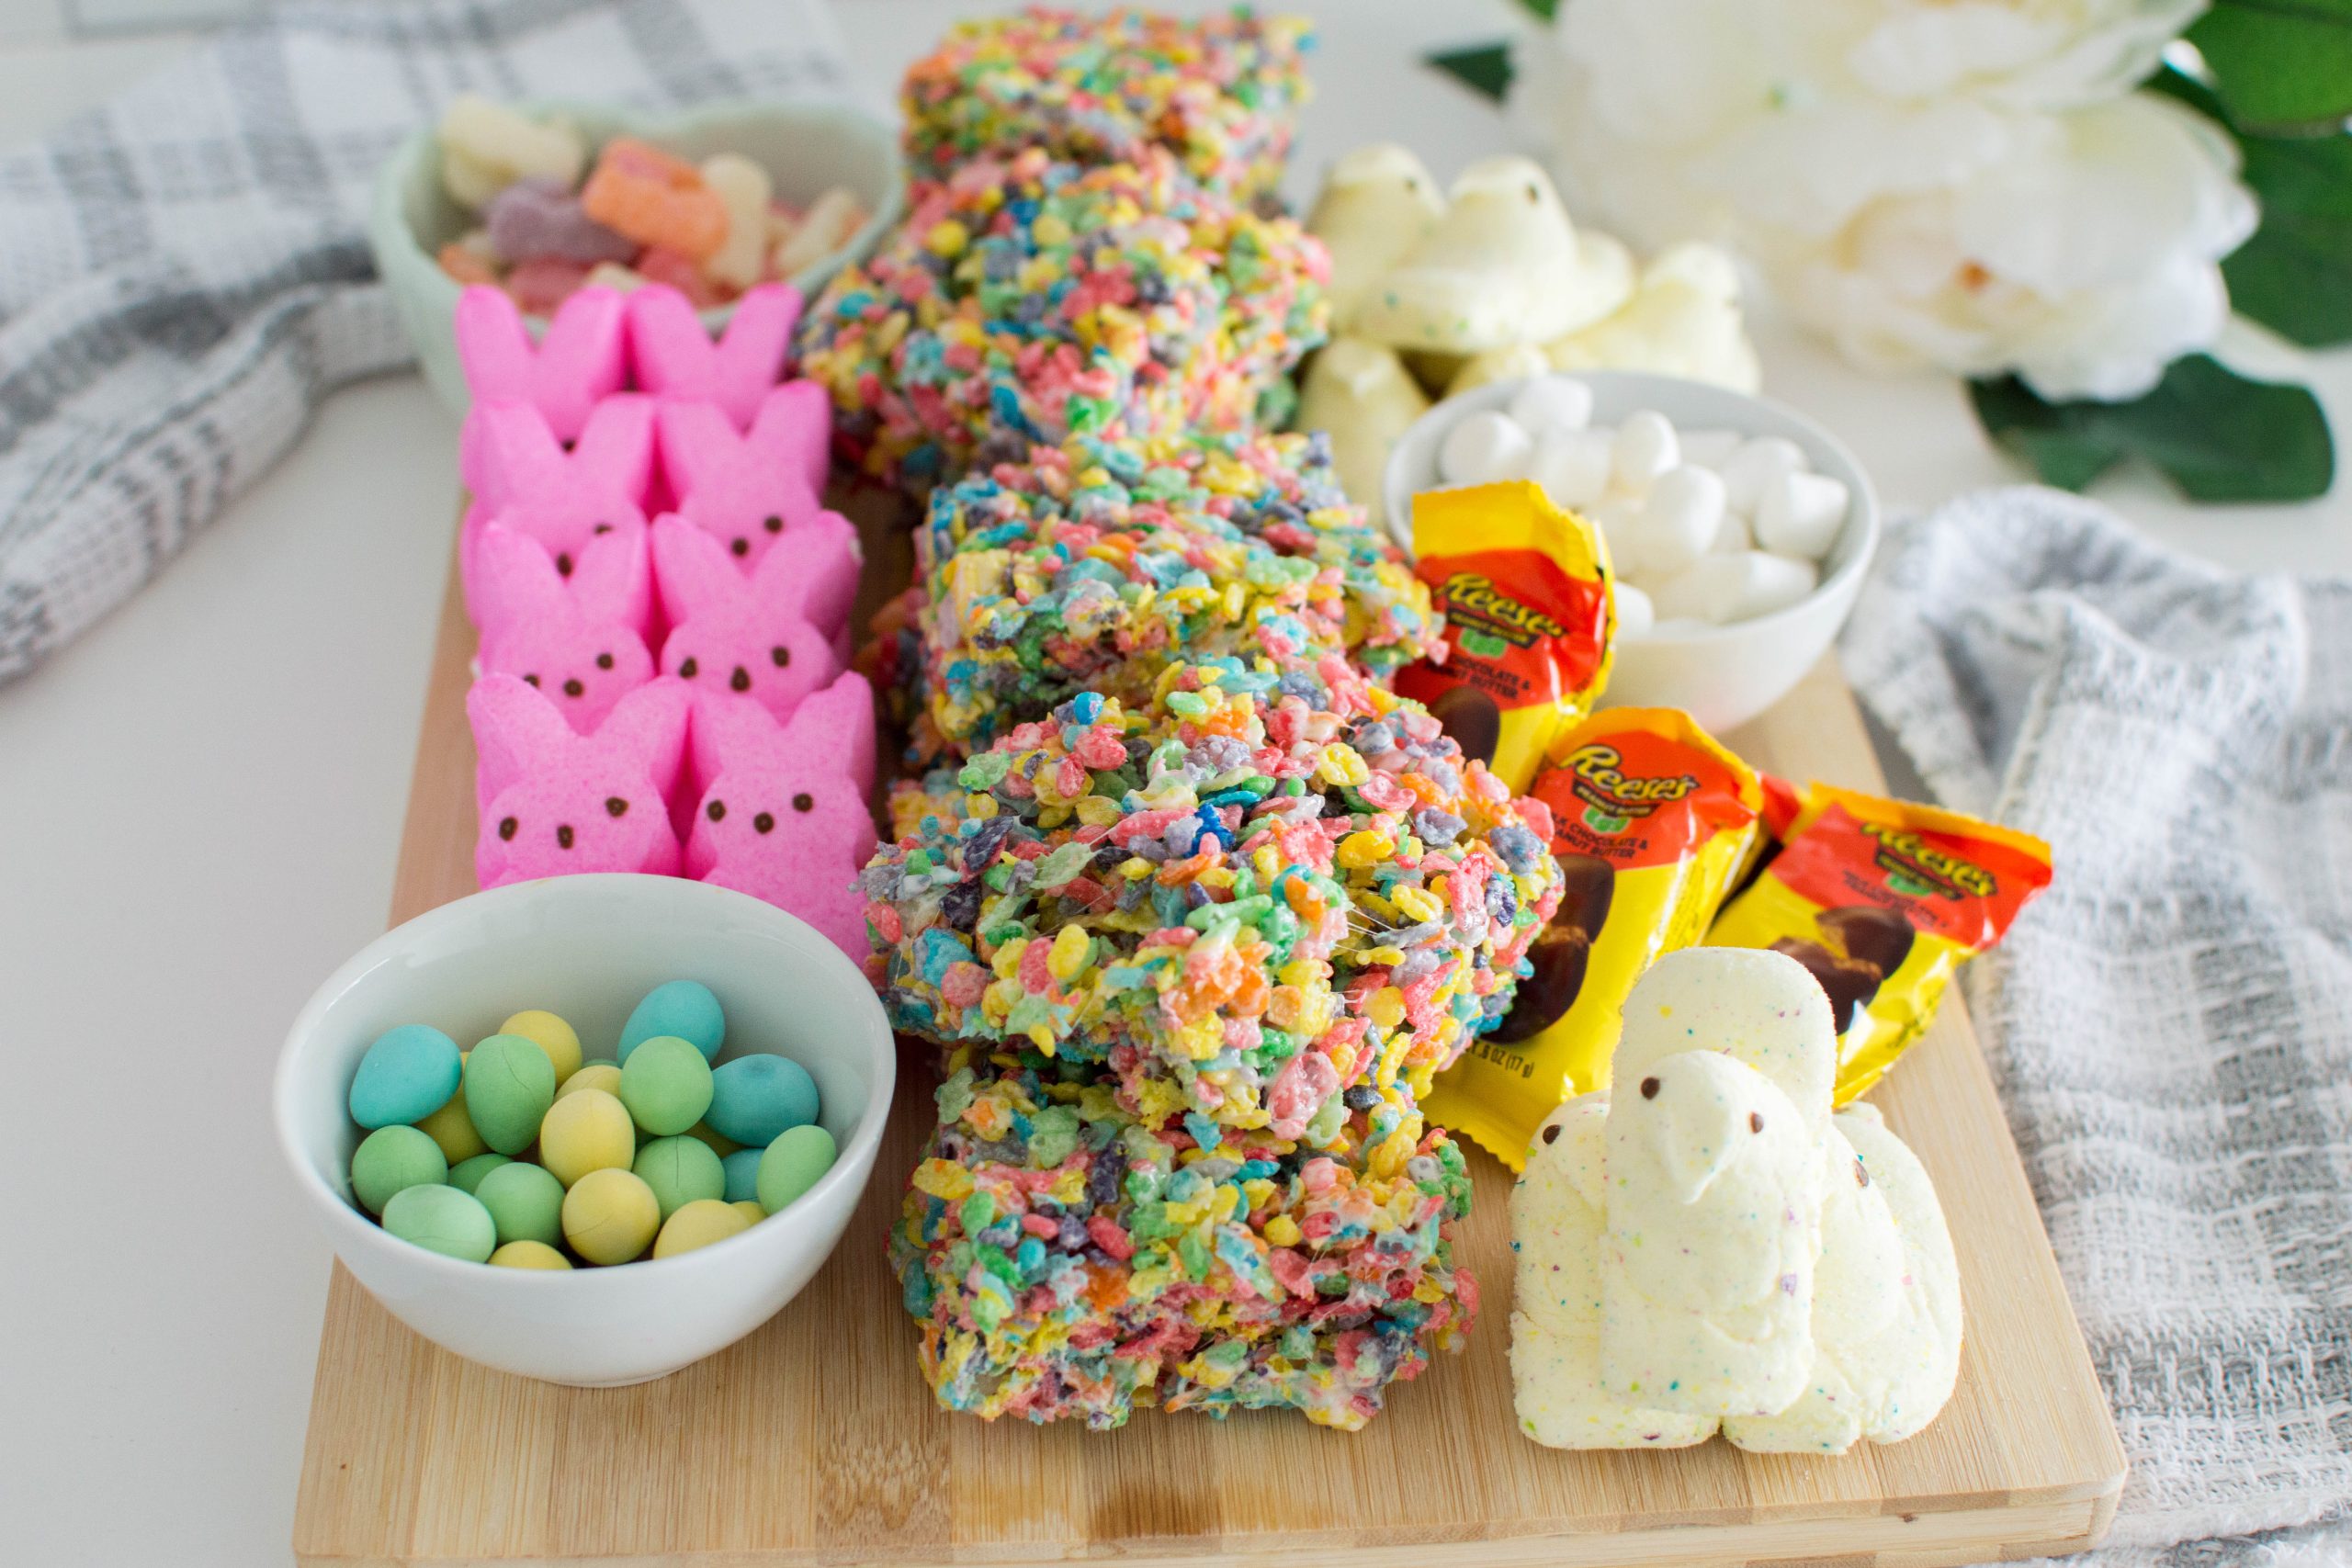 What’s coloful, flavorful, and has ALL the Easter vibes? This Easter Candy Charcuterie Board, of course! Learn how to make a sweet charcuterie board with our surefire Easter-themed tips!